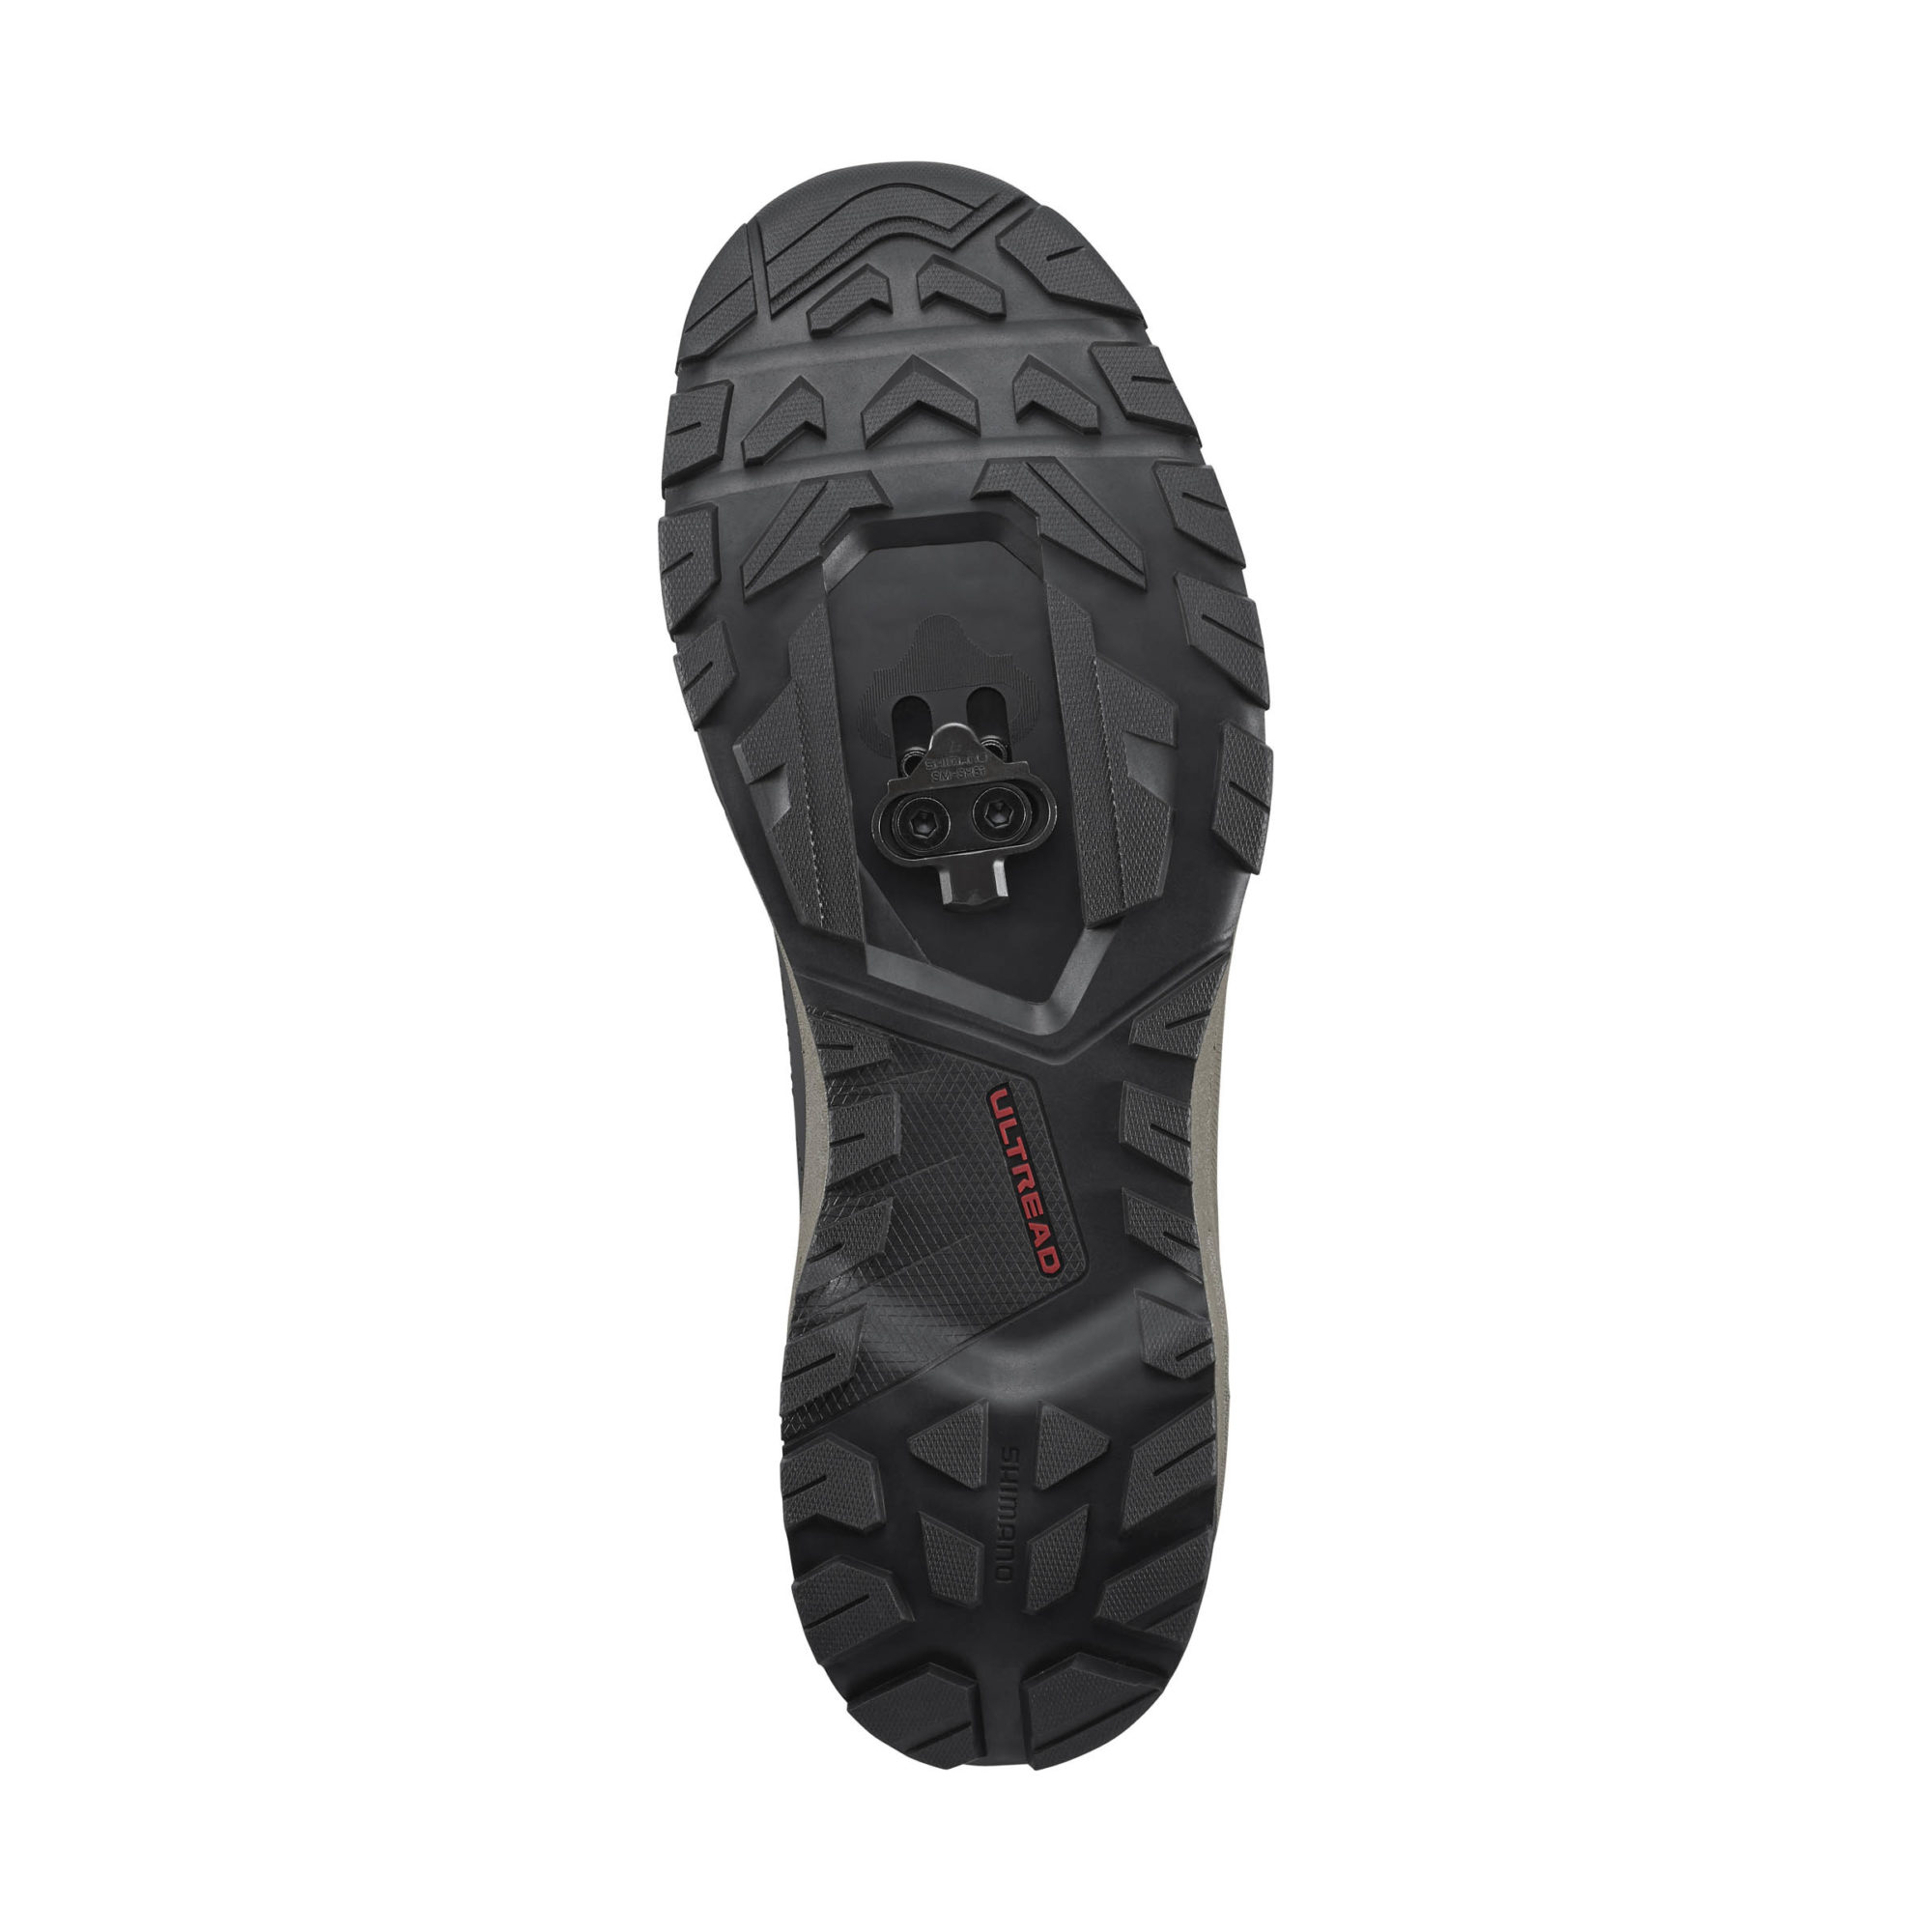 New Shimano RX6 and more SPD Adventure Shoes - BIKEPACKING.com